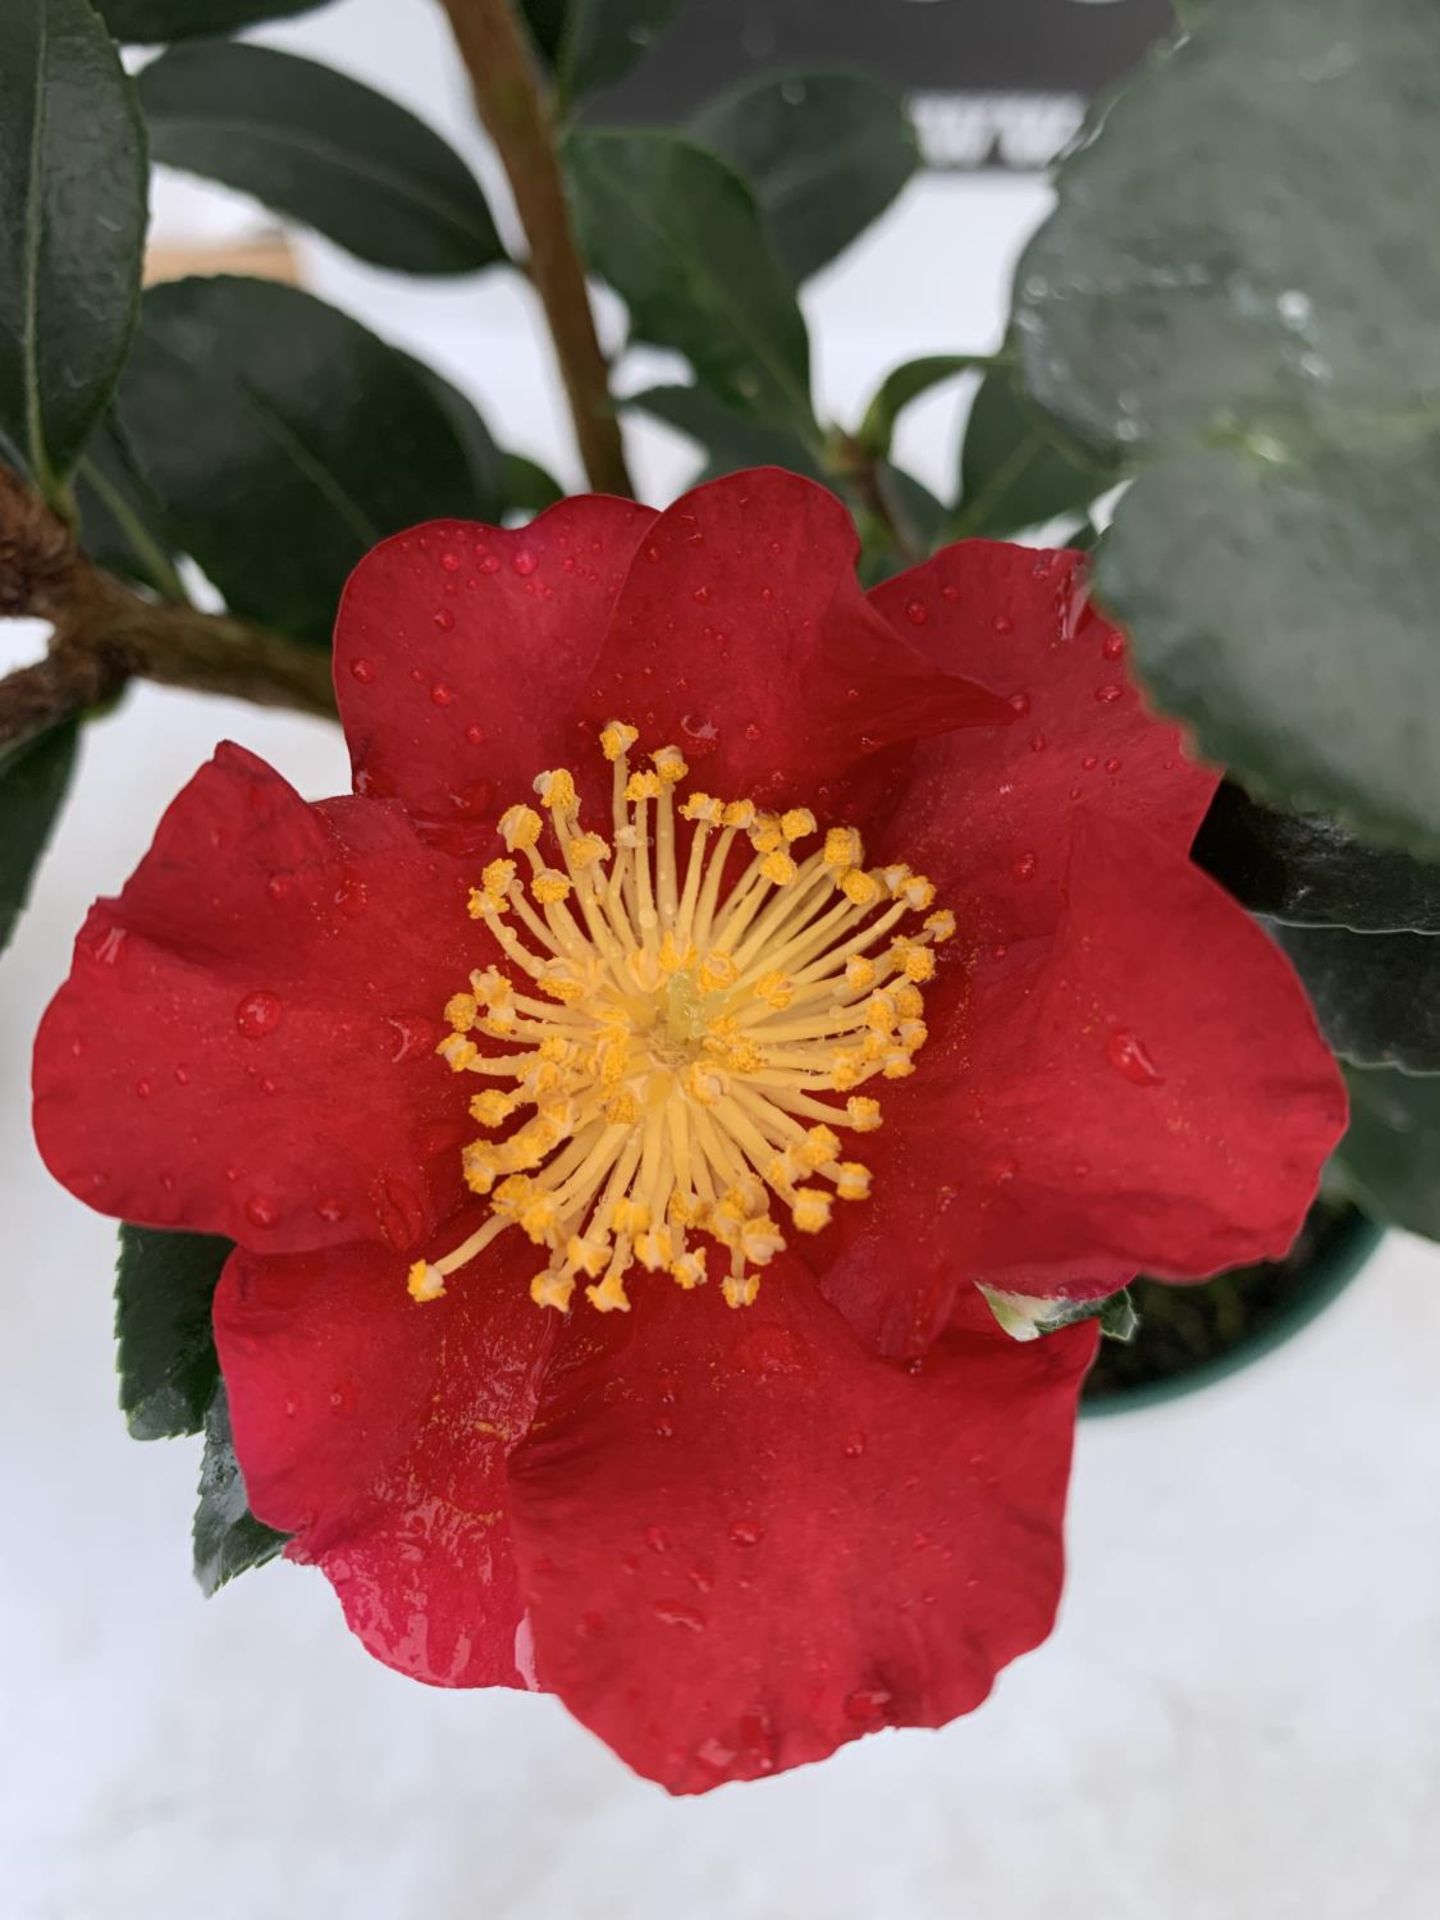 TWO CAMELLIA TERRA PLANTS 'YULETIDE' APPROX 70CM IN HEIGHT IN 1.5 LTR POTS PLUS VAT TO BE SOLD FOR - Image 5 of 5